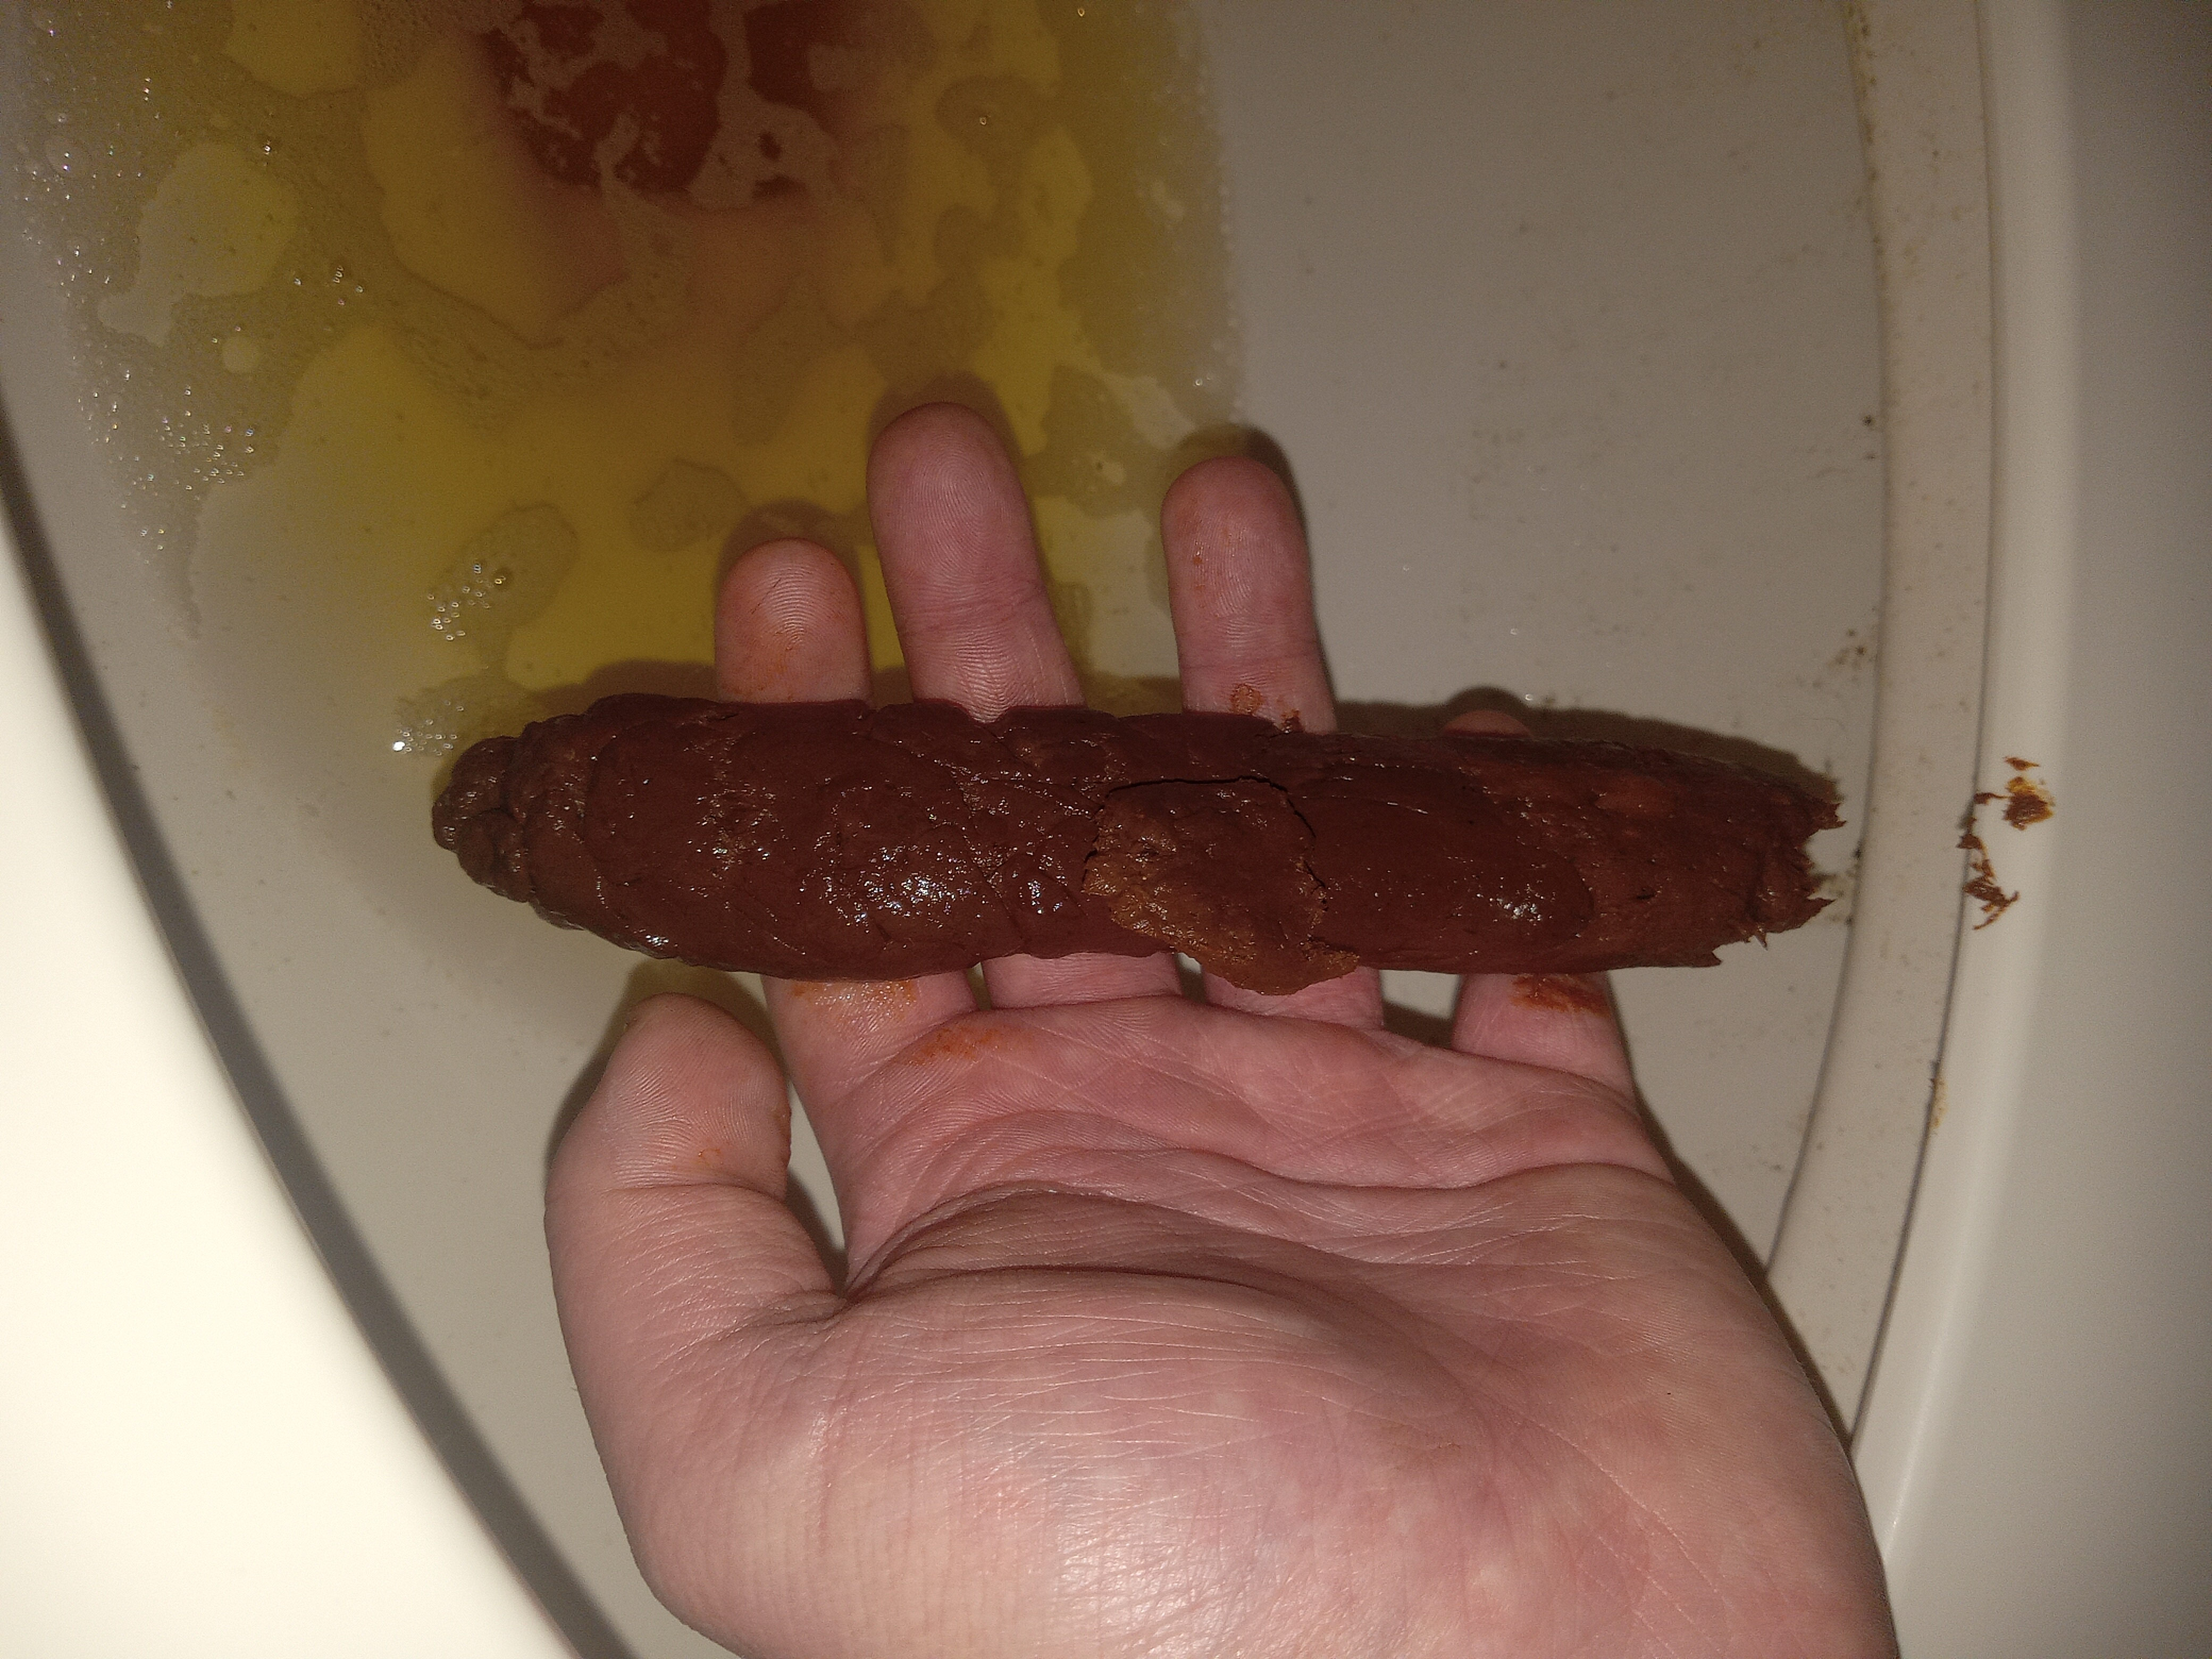 Pooping in my hand - video 2